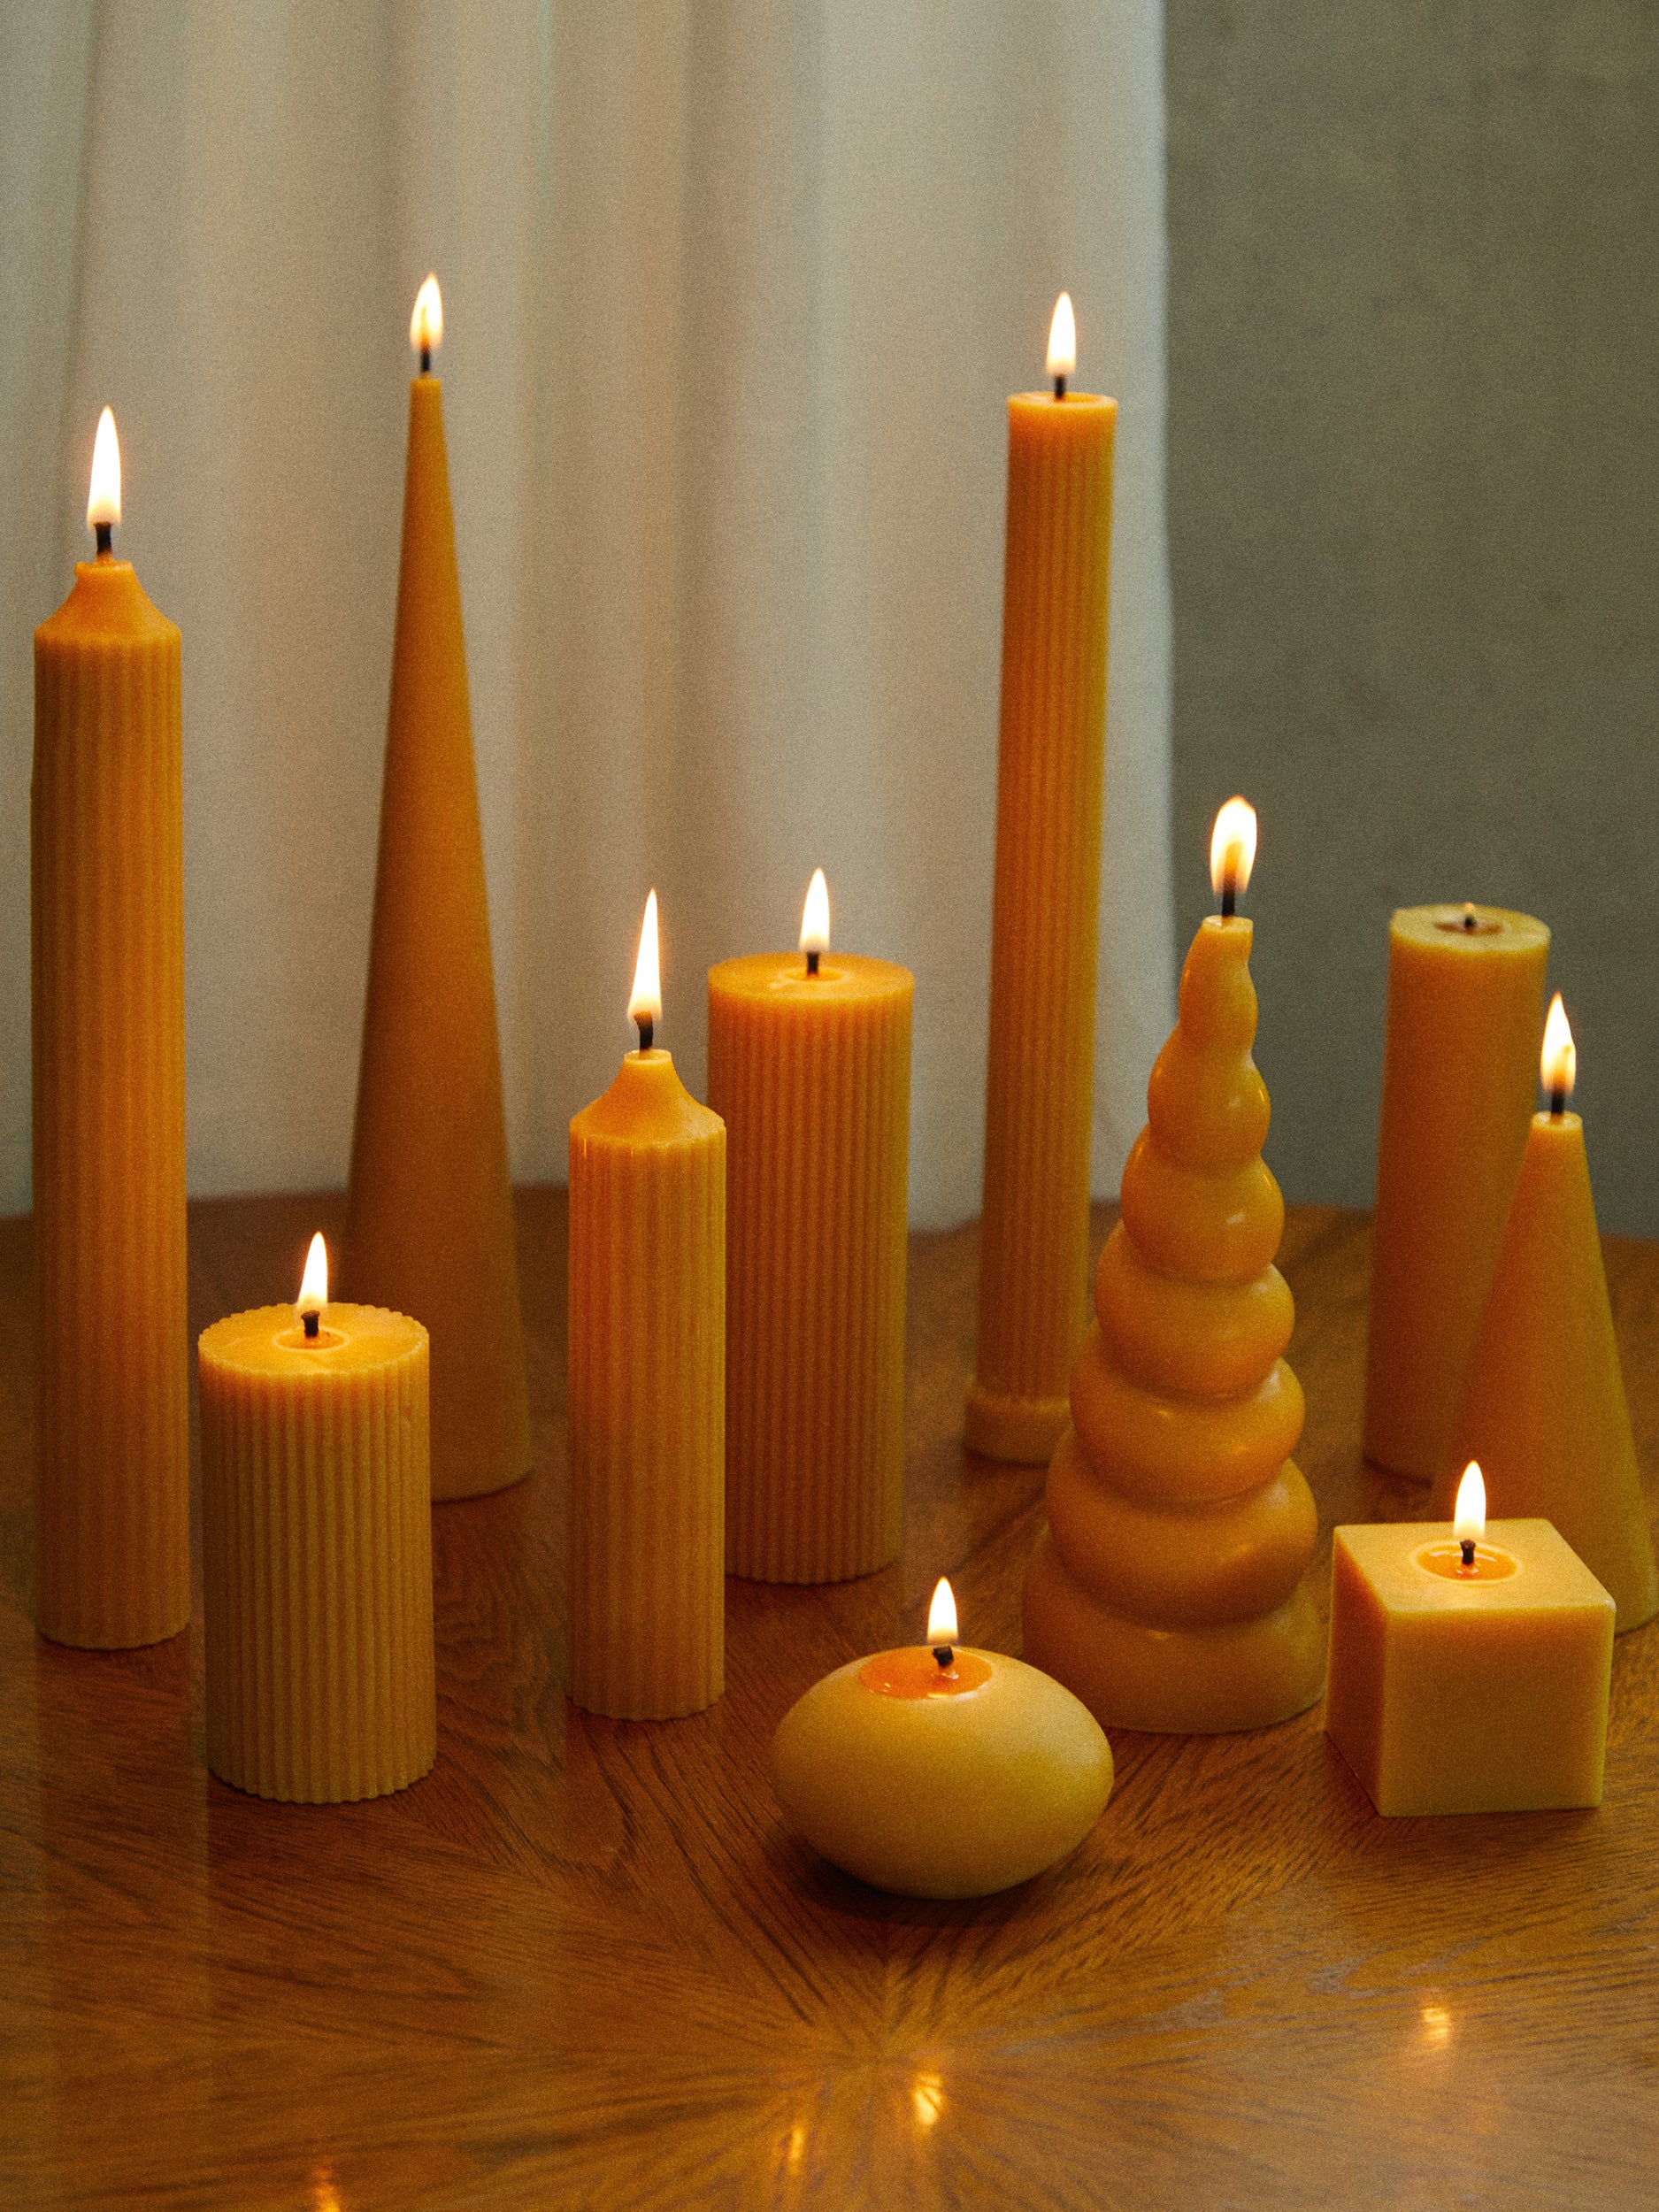 Wholesale Beeswax Candles - Bulk Beeswax Candles – BZZWAX